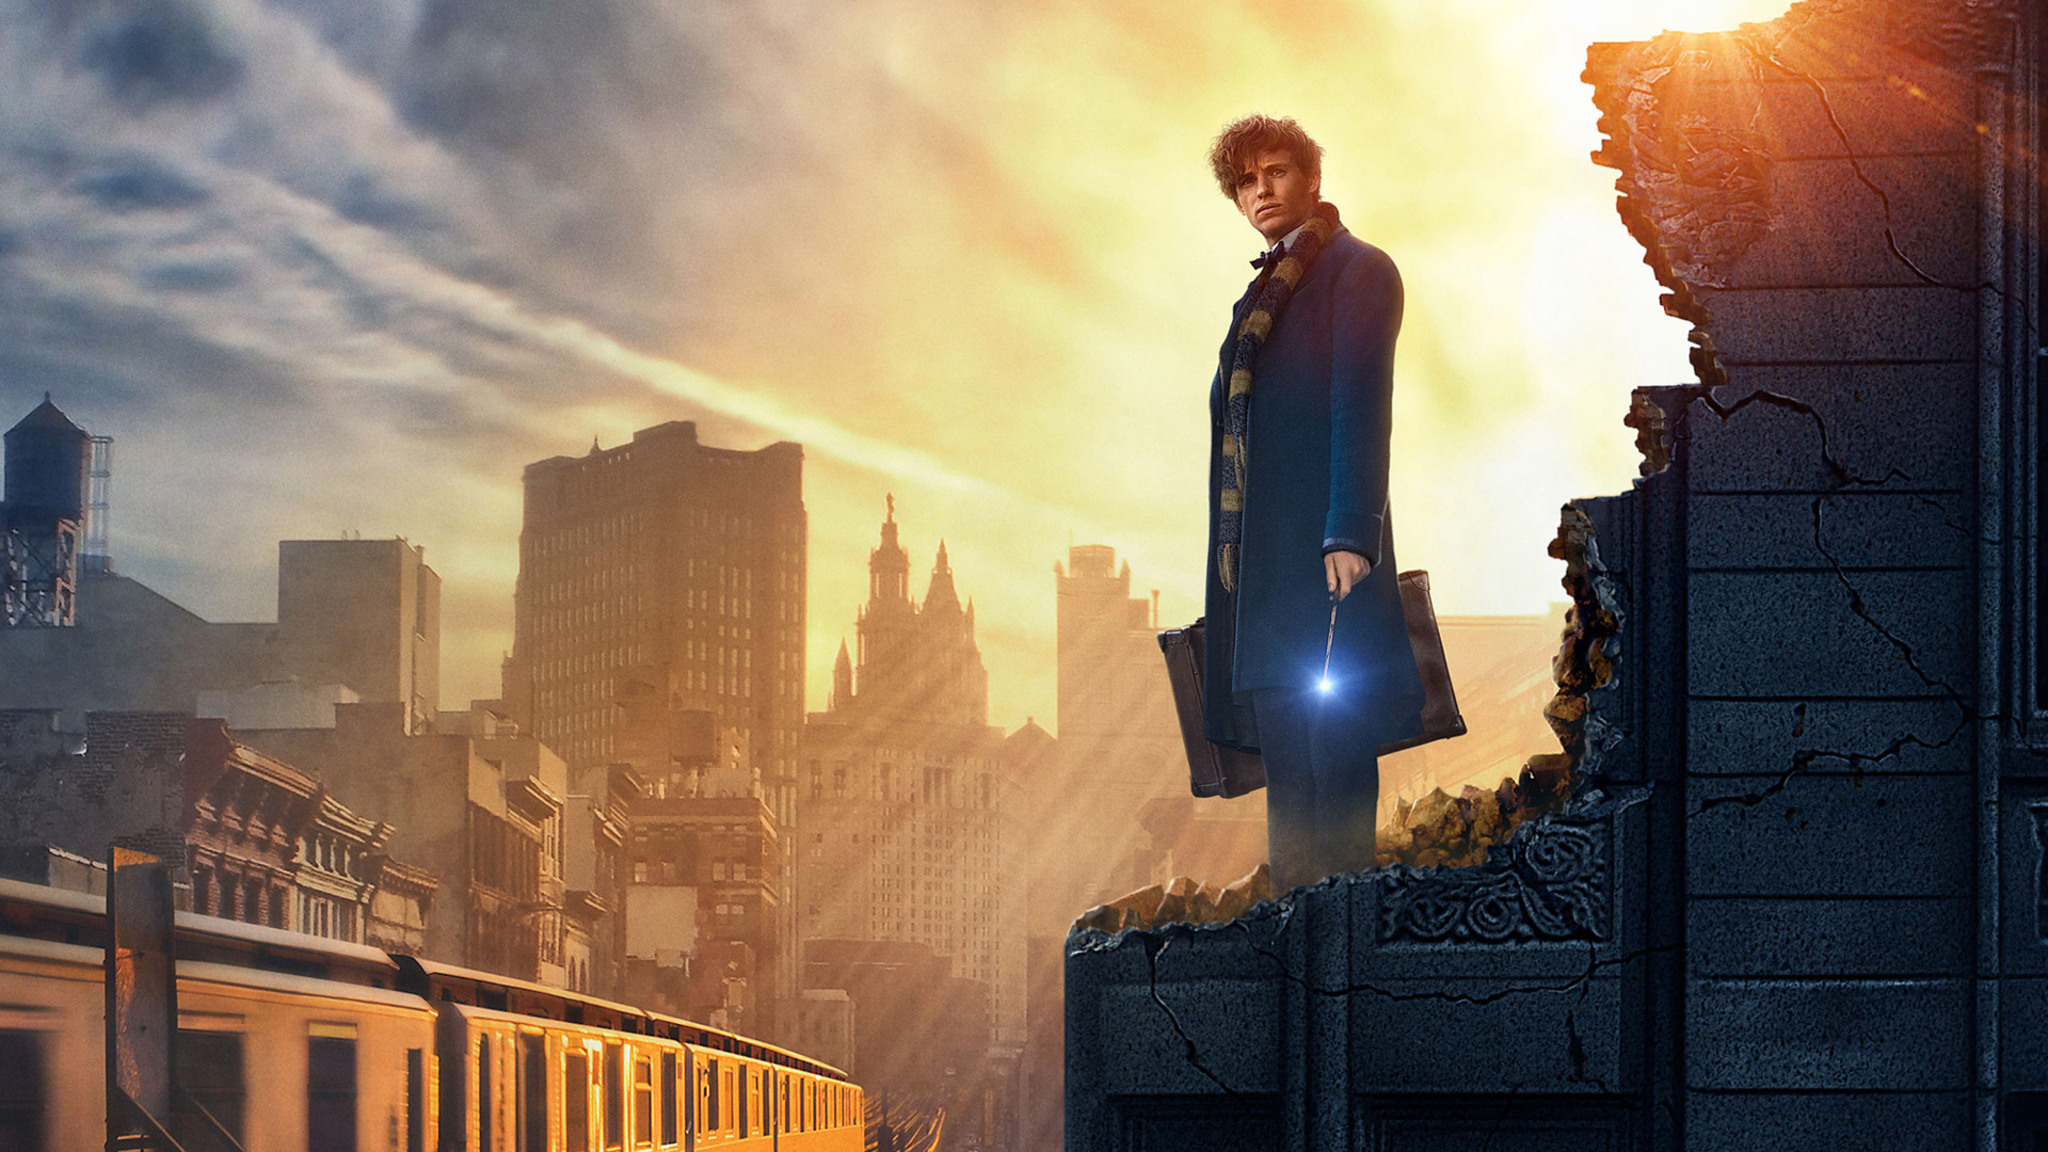 Hd 2016 Watch Fantastic Beasts And Where To Find Them Film Review